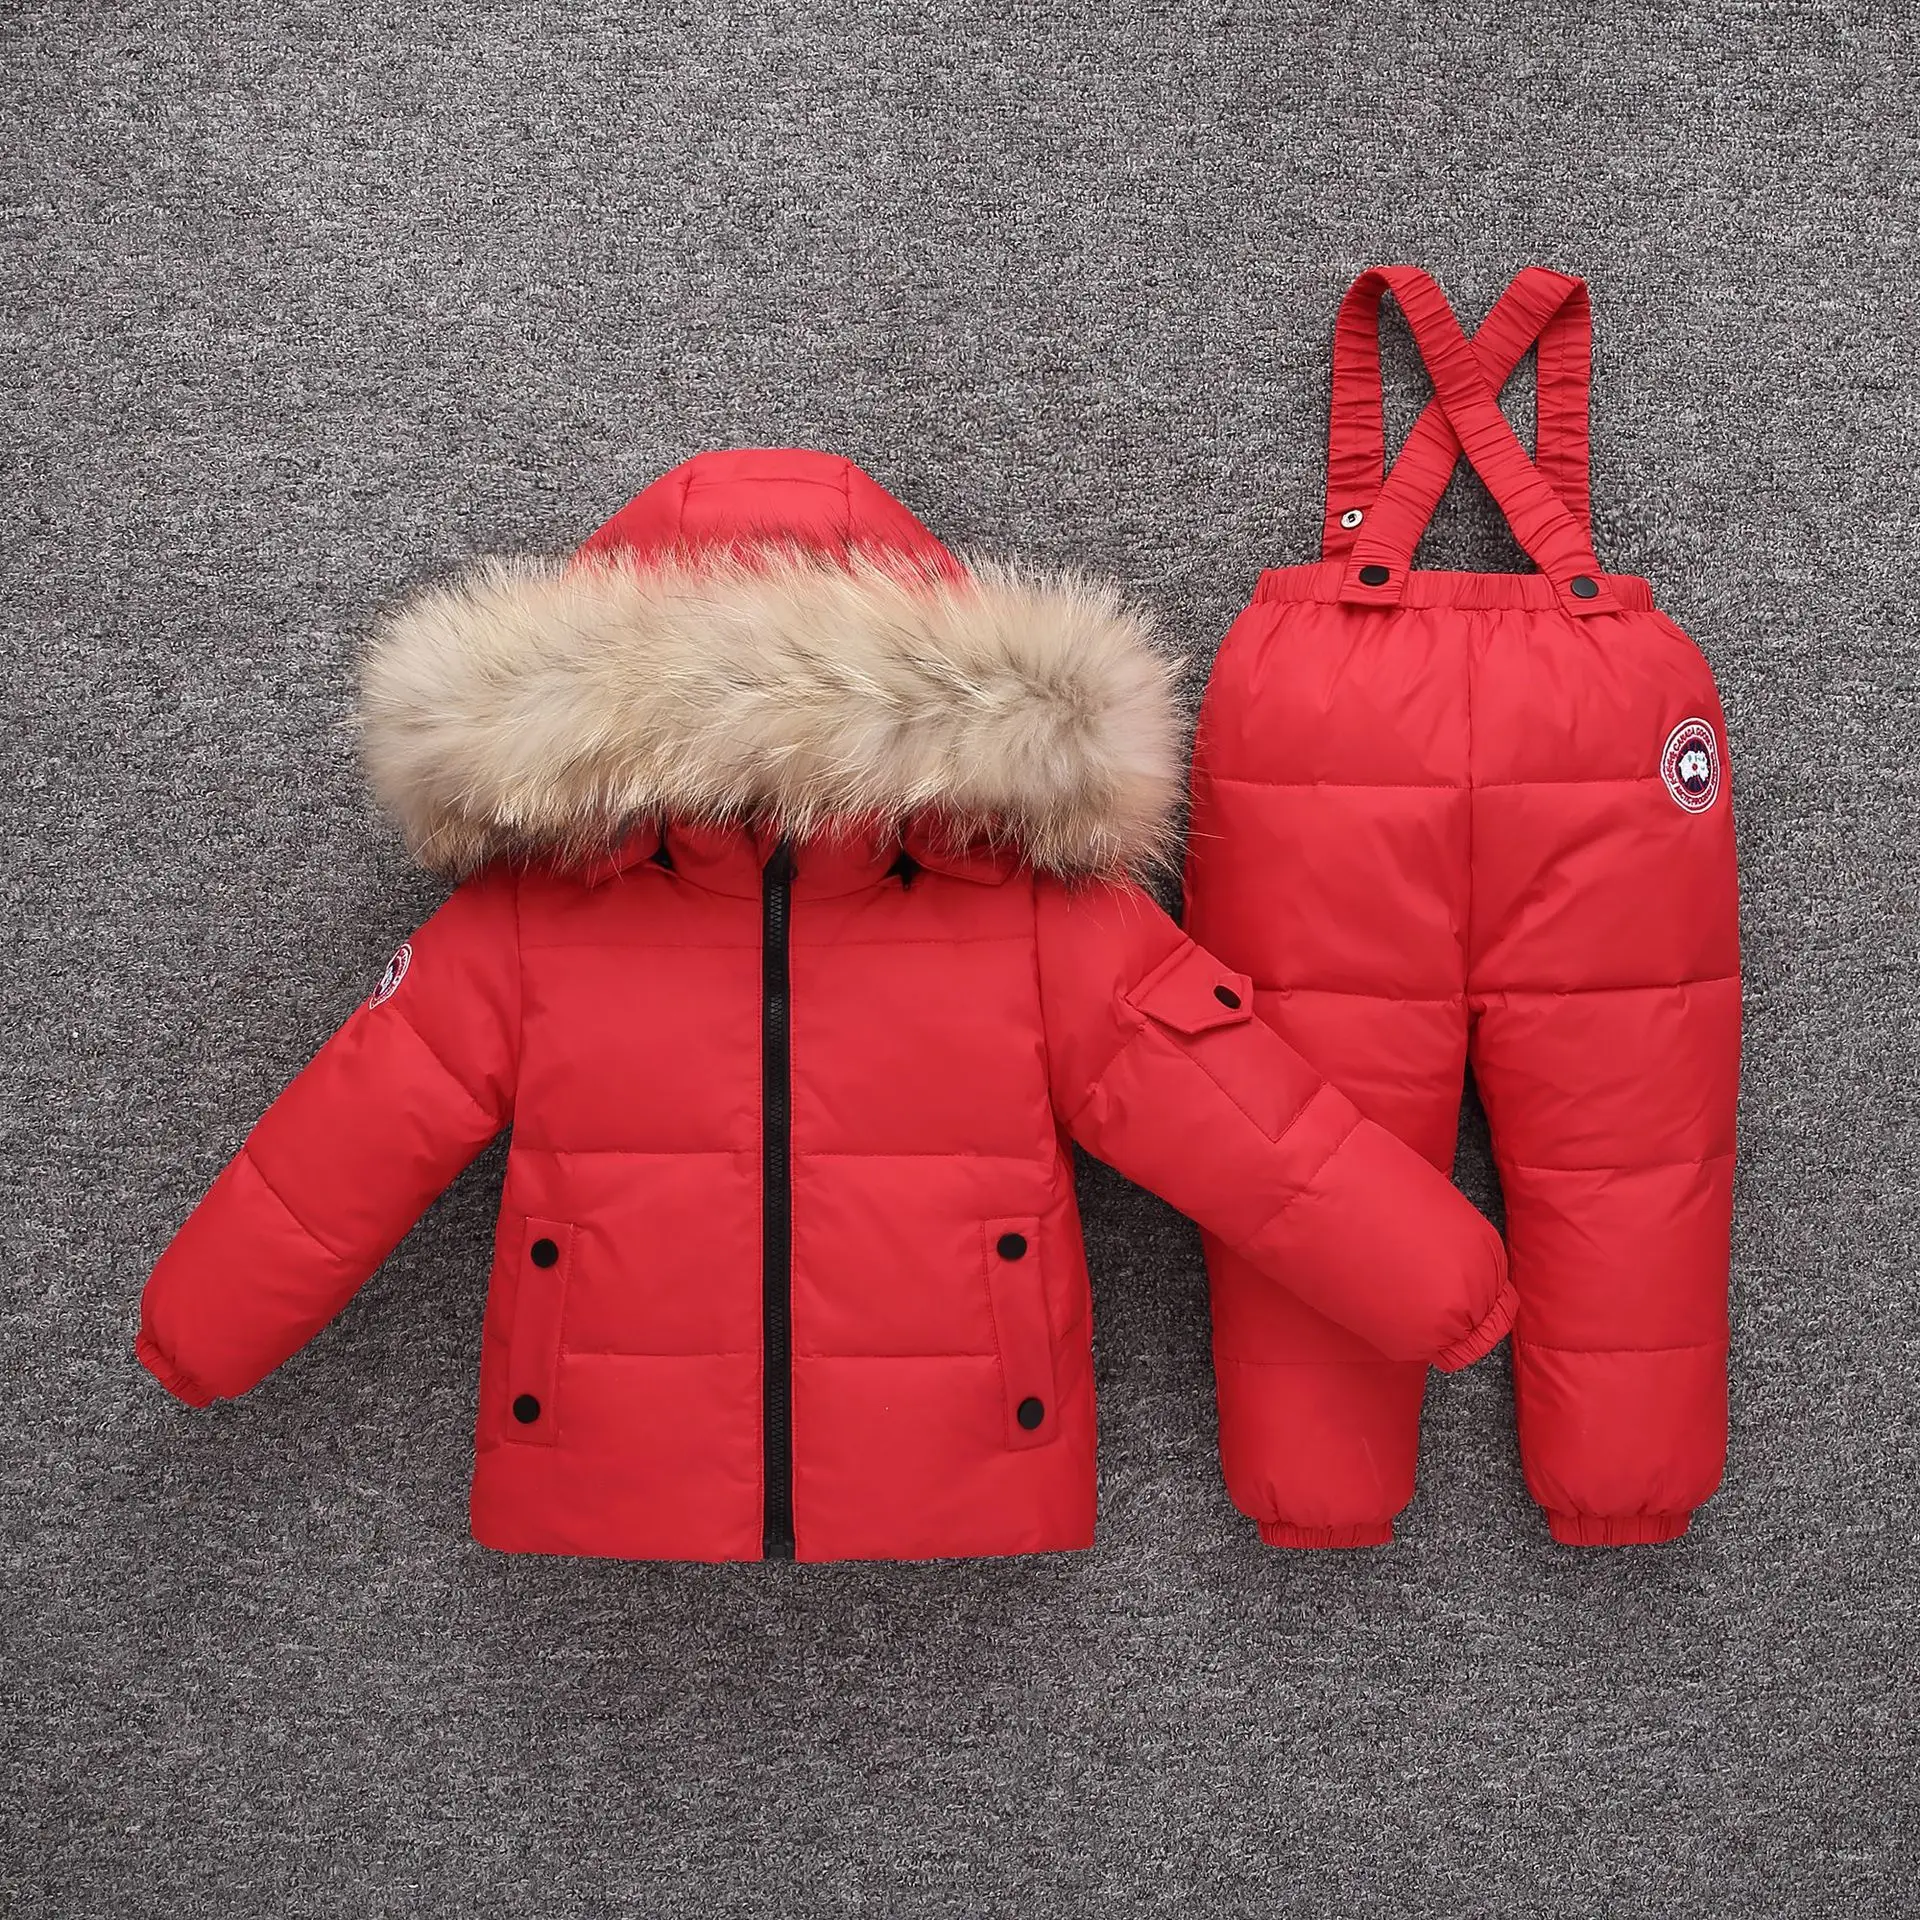 Boy Clothes Baby Girls Clothing Sets Sports Suits White Duck Down Outfit Newborn Christmas Autumn Winter 6-24 Monthes Ski Suit - Цвет: red